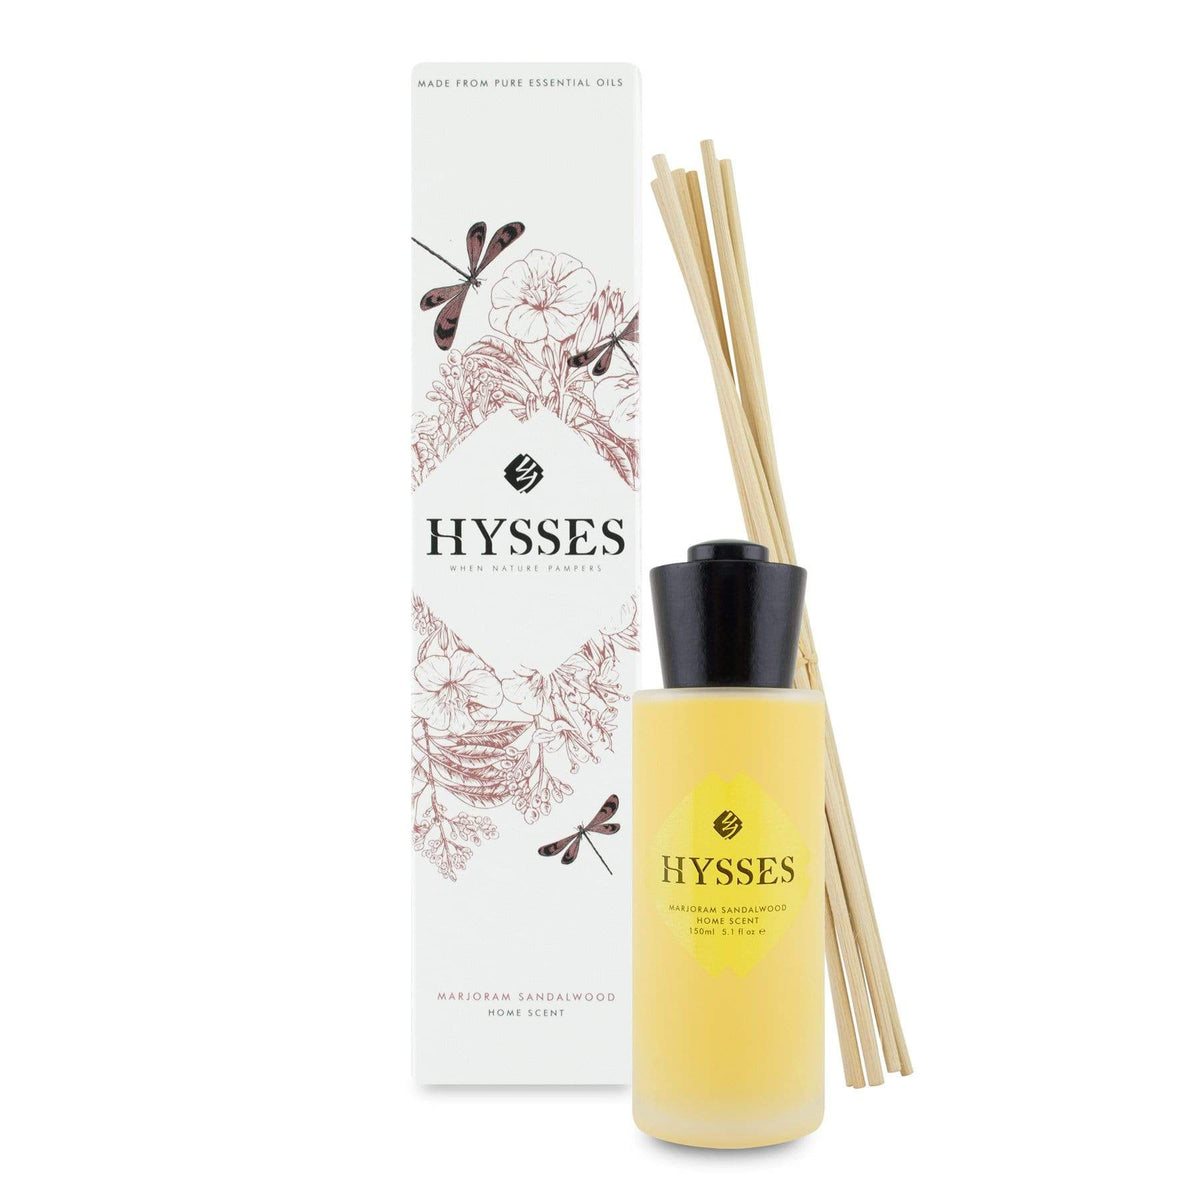 Hysses Home Scents 150ml Home Scent Reed Diffuser Marjoram Sandalwood